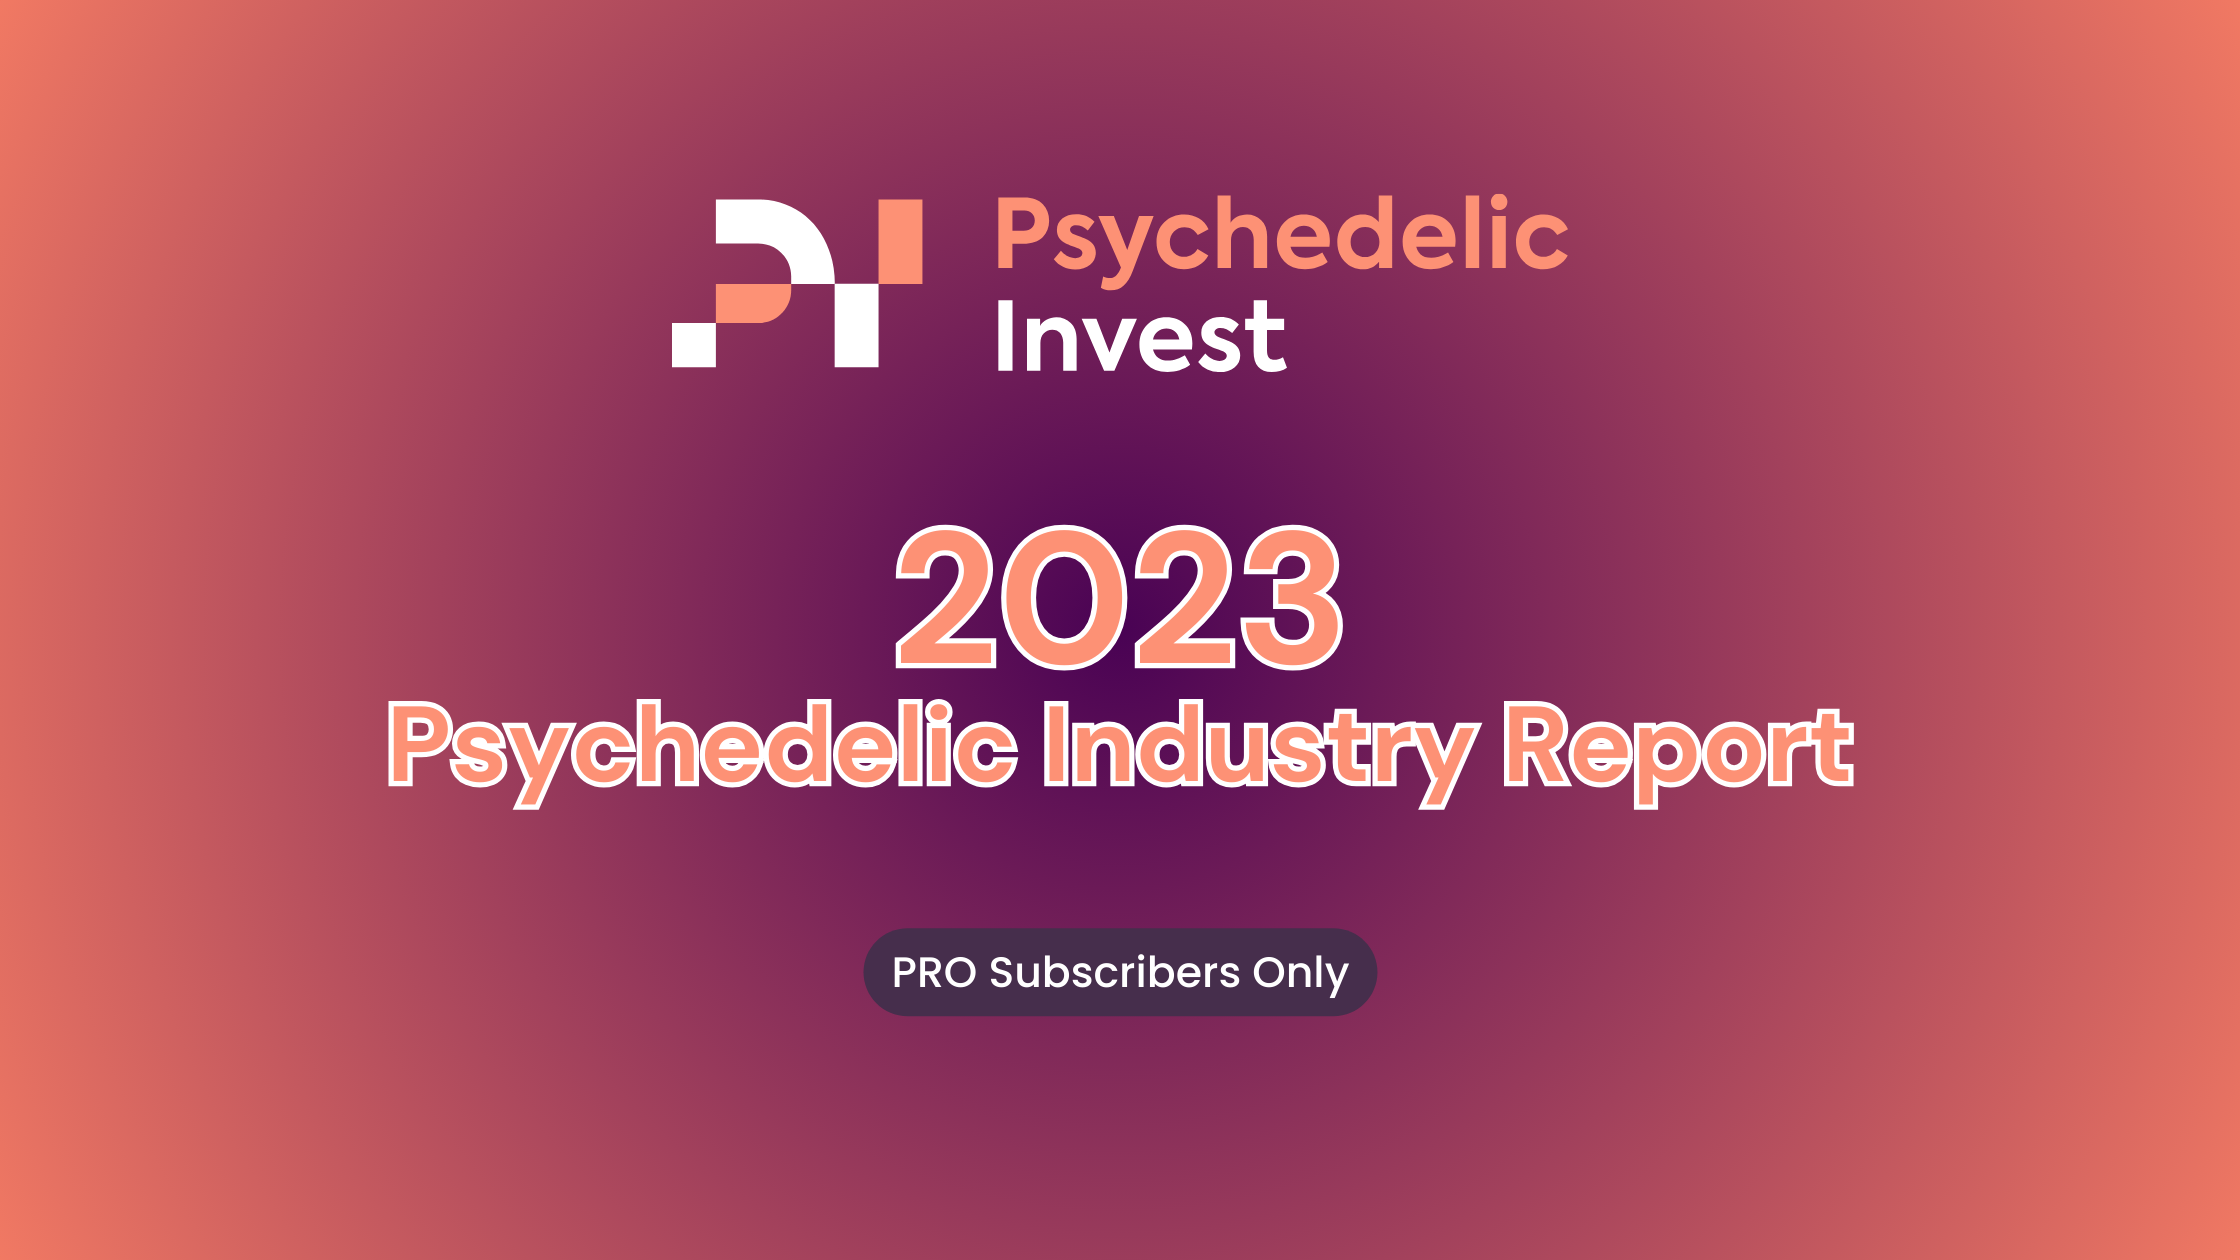 2023: The Psychedelic Industry Report (PRO REPORT)